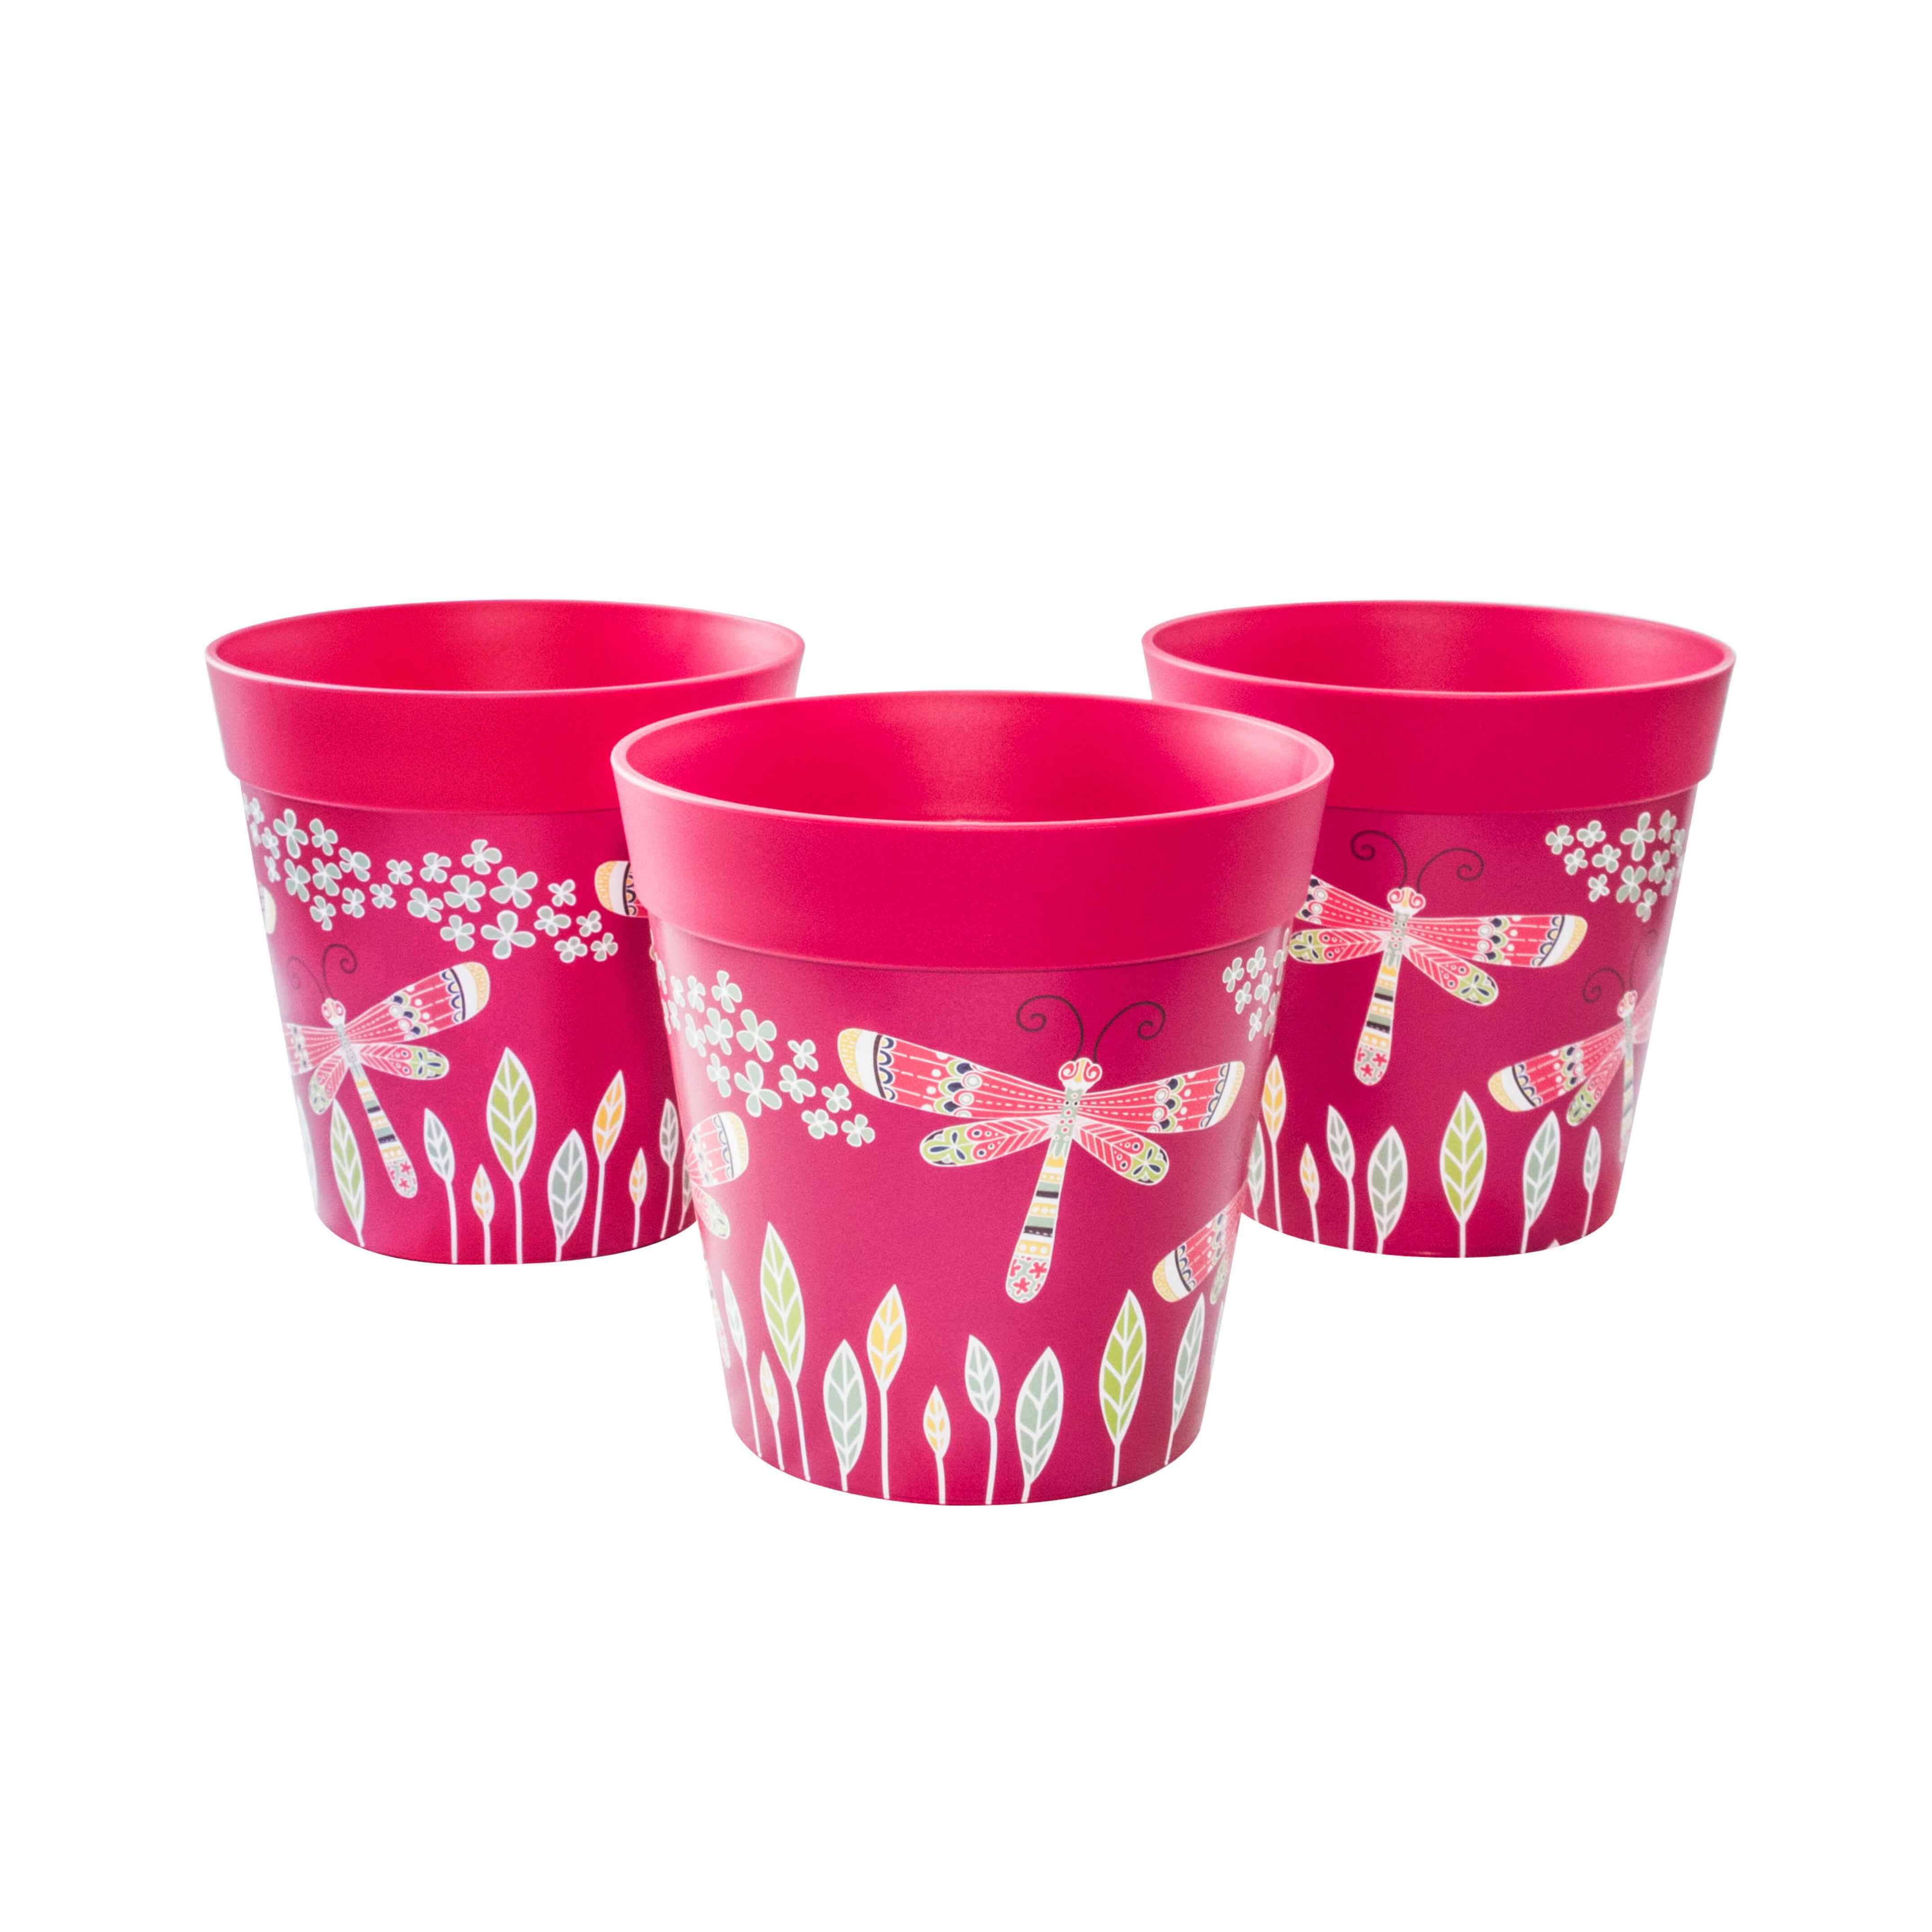 Picture of 3 Small 15cm Plastic Pink Dragonfly Pattern Indoor/Outdoor Flowerpots